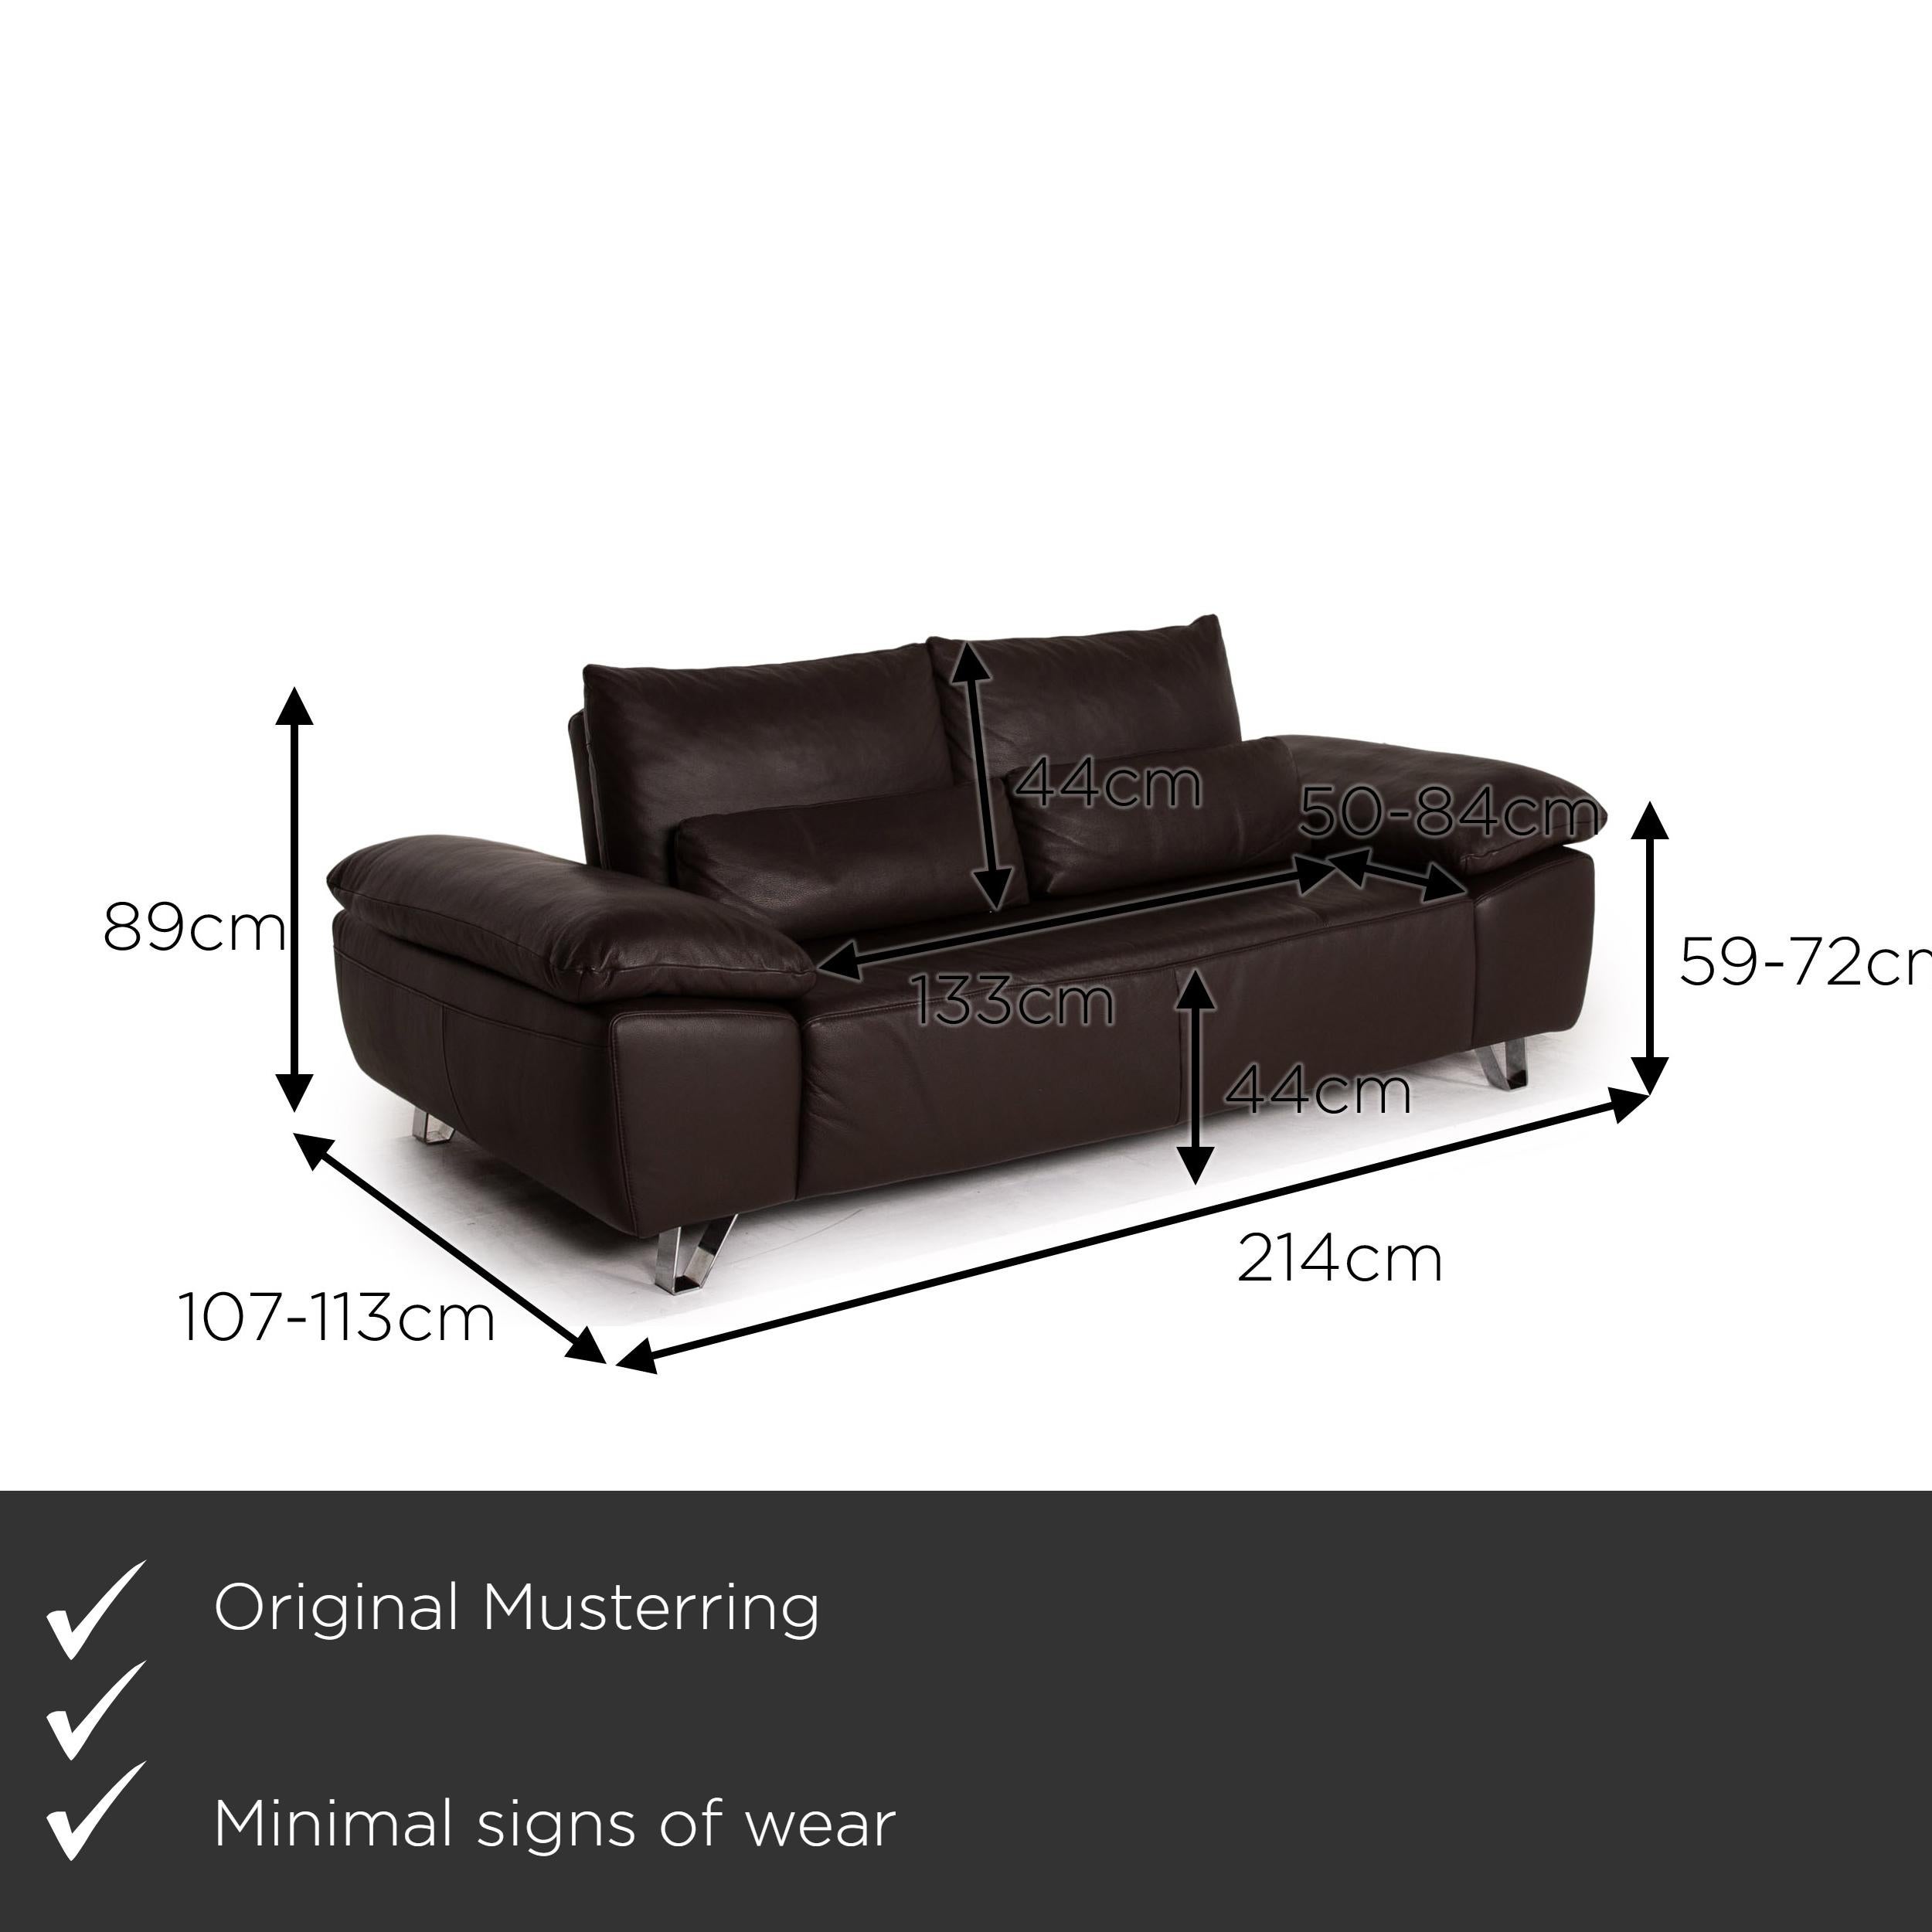 Modern Musterring MR 680 Two-Seater Sofa Brown Leather Couch Function